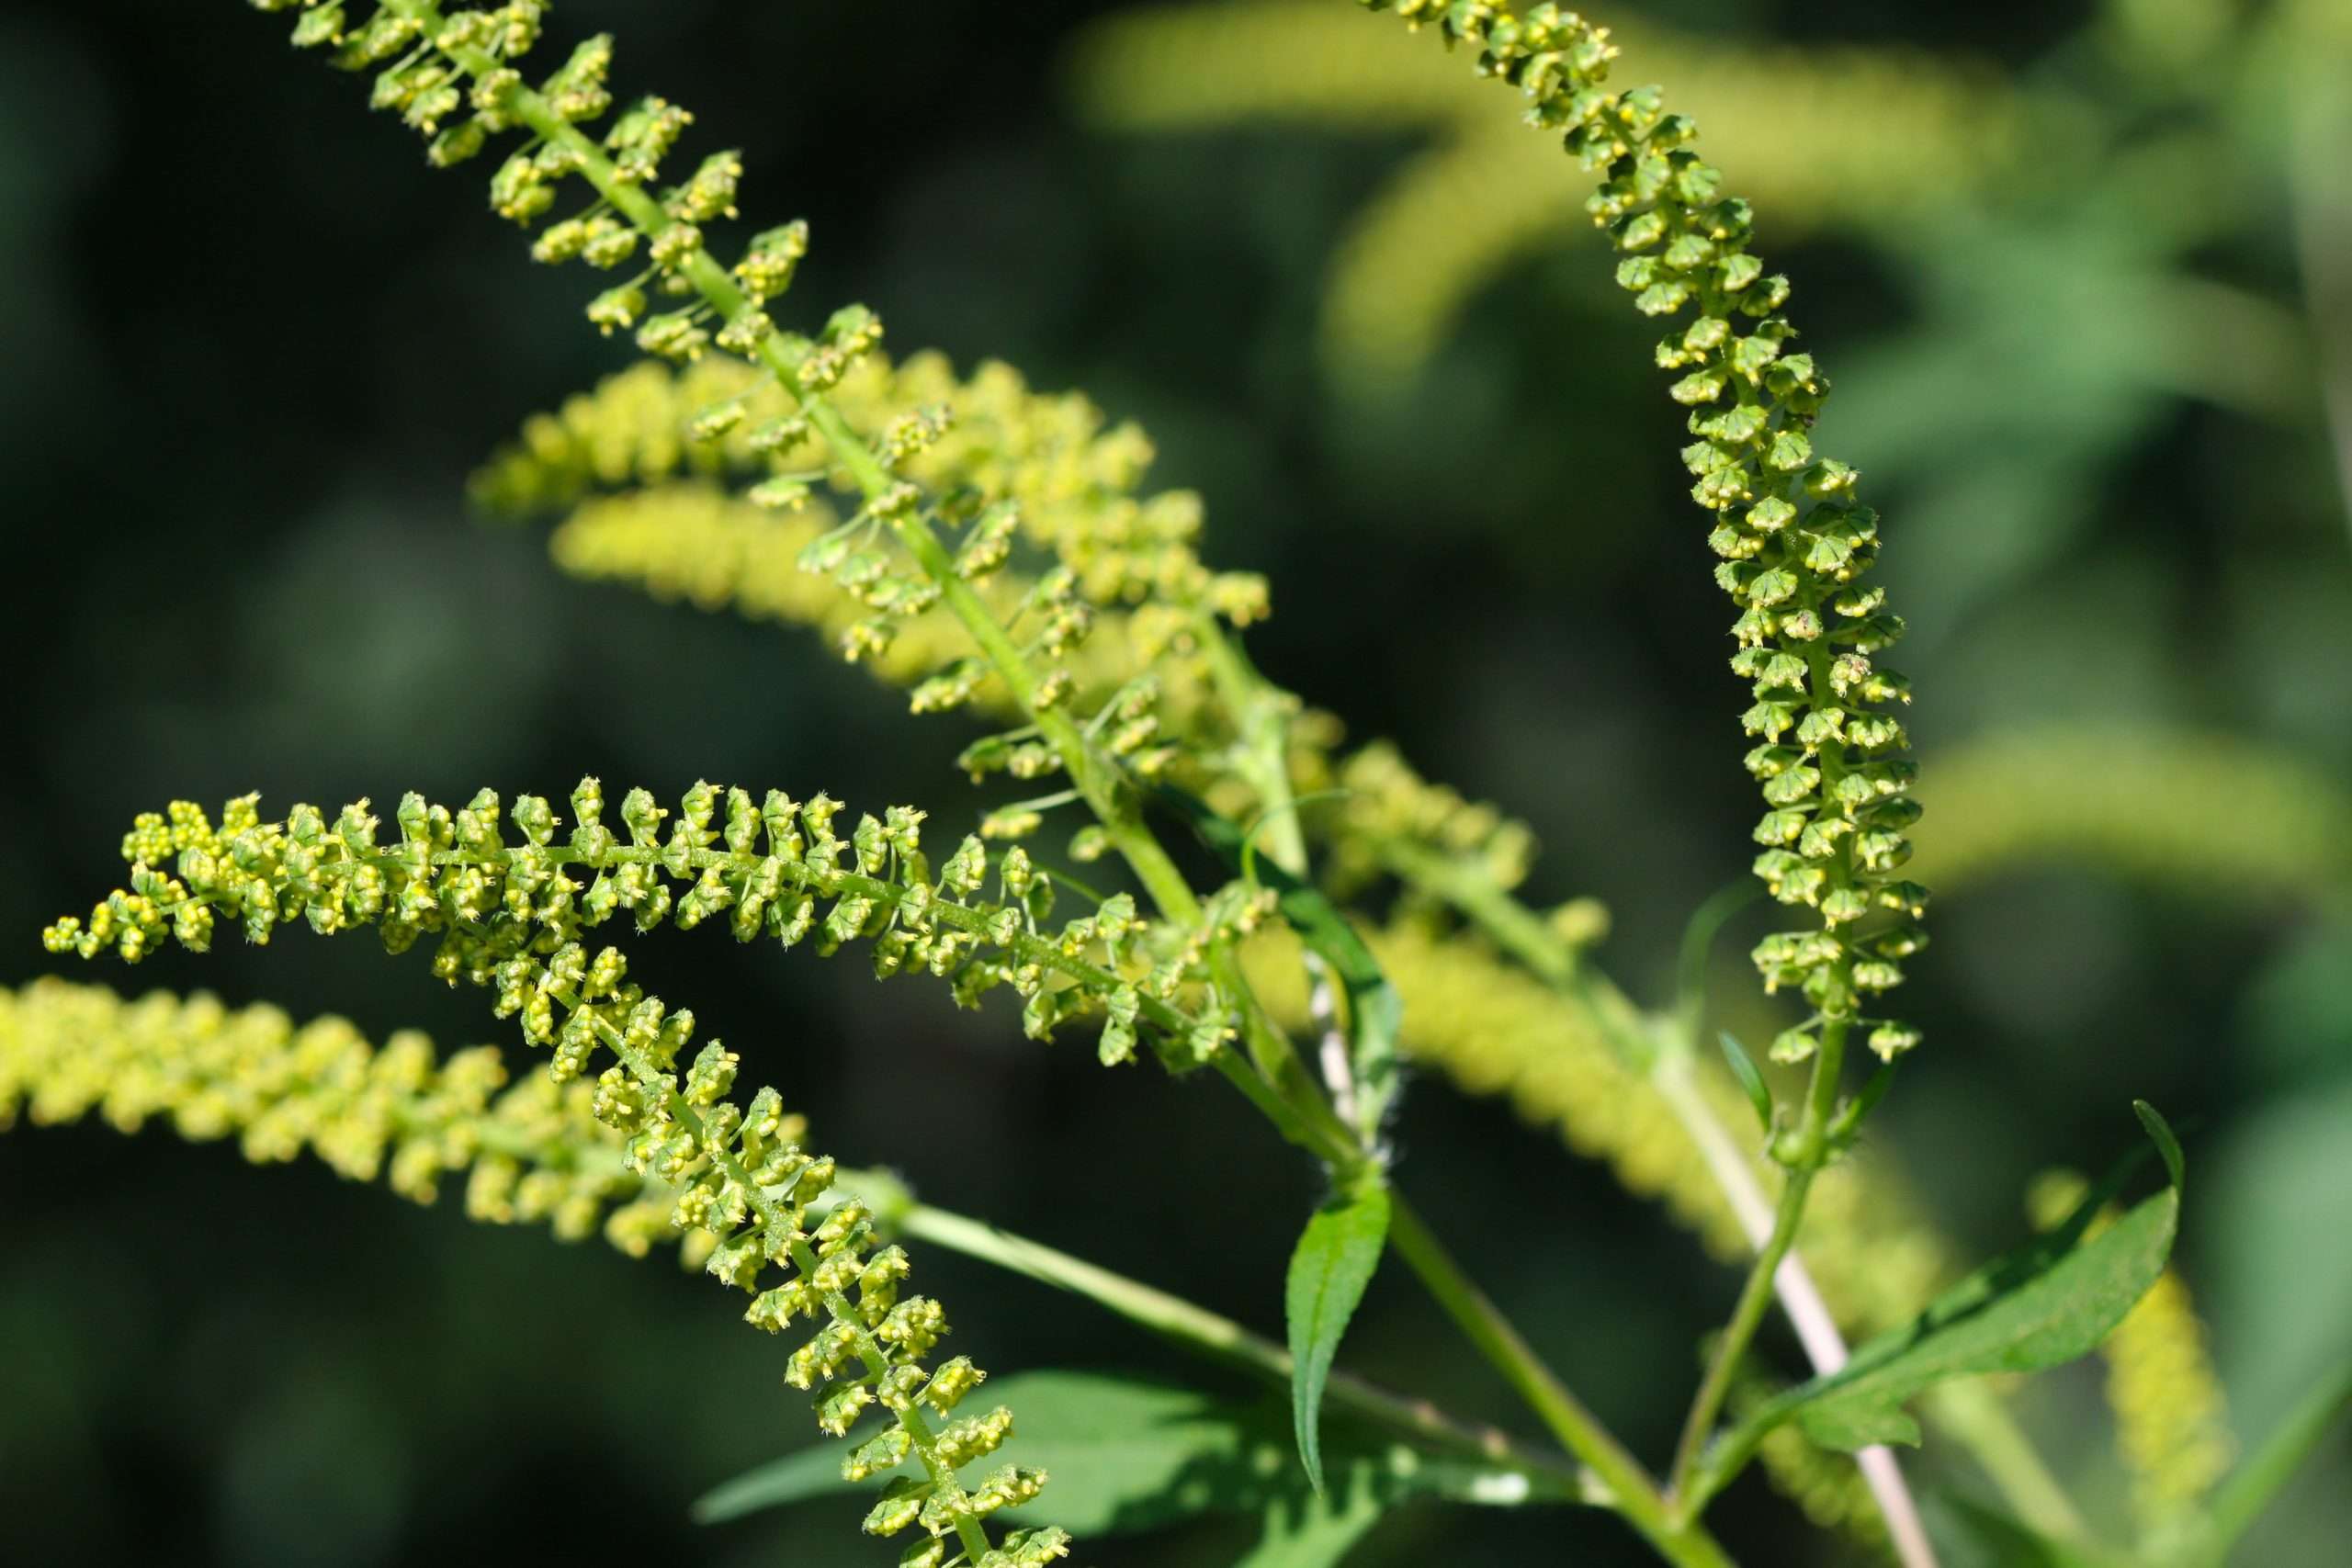 How to avoid Ragweed Allergy, Dr. Louis Mariotti